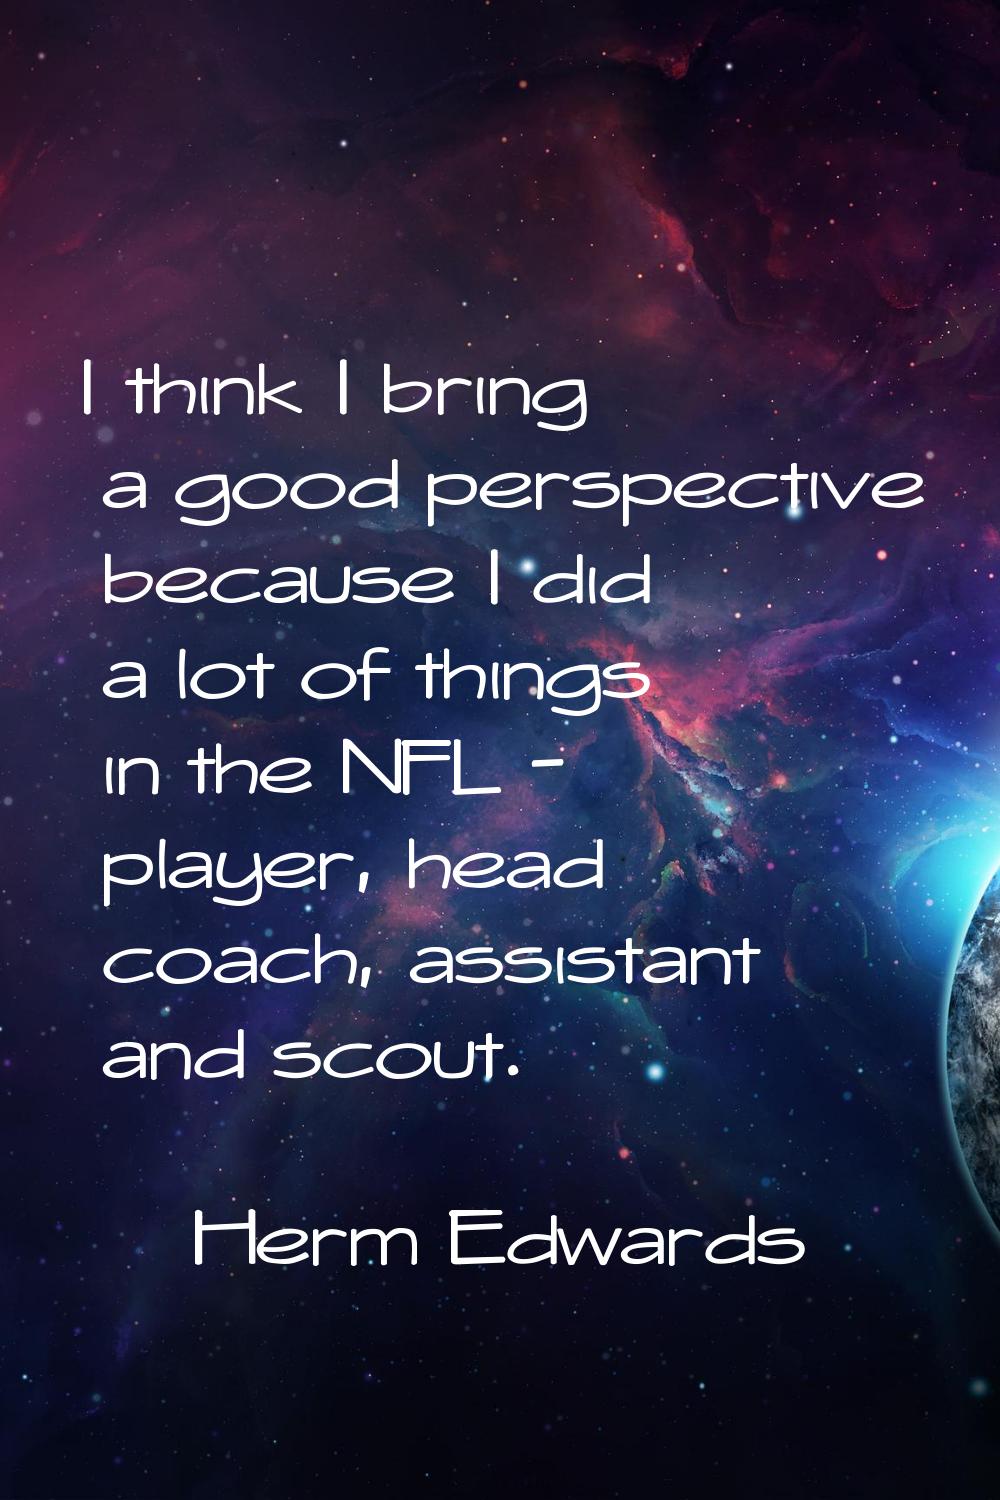 I think I bring a good perspective because I did a lot of things in the NFL - player, head coach, a